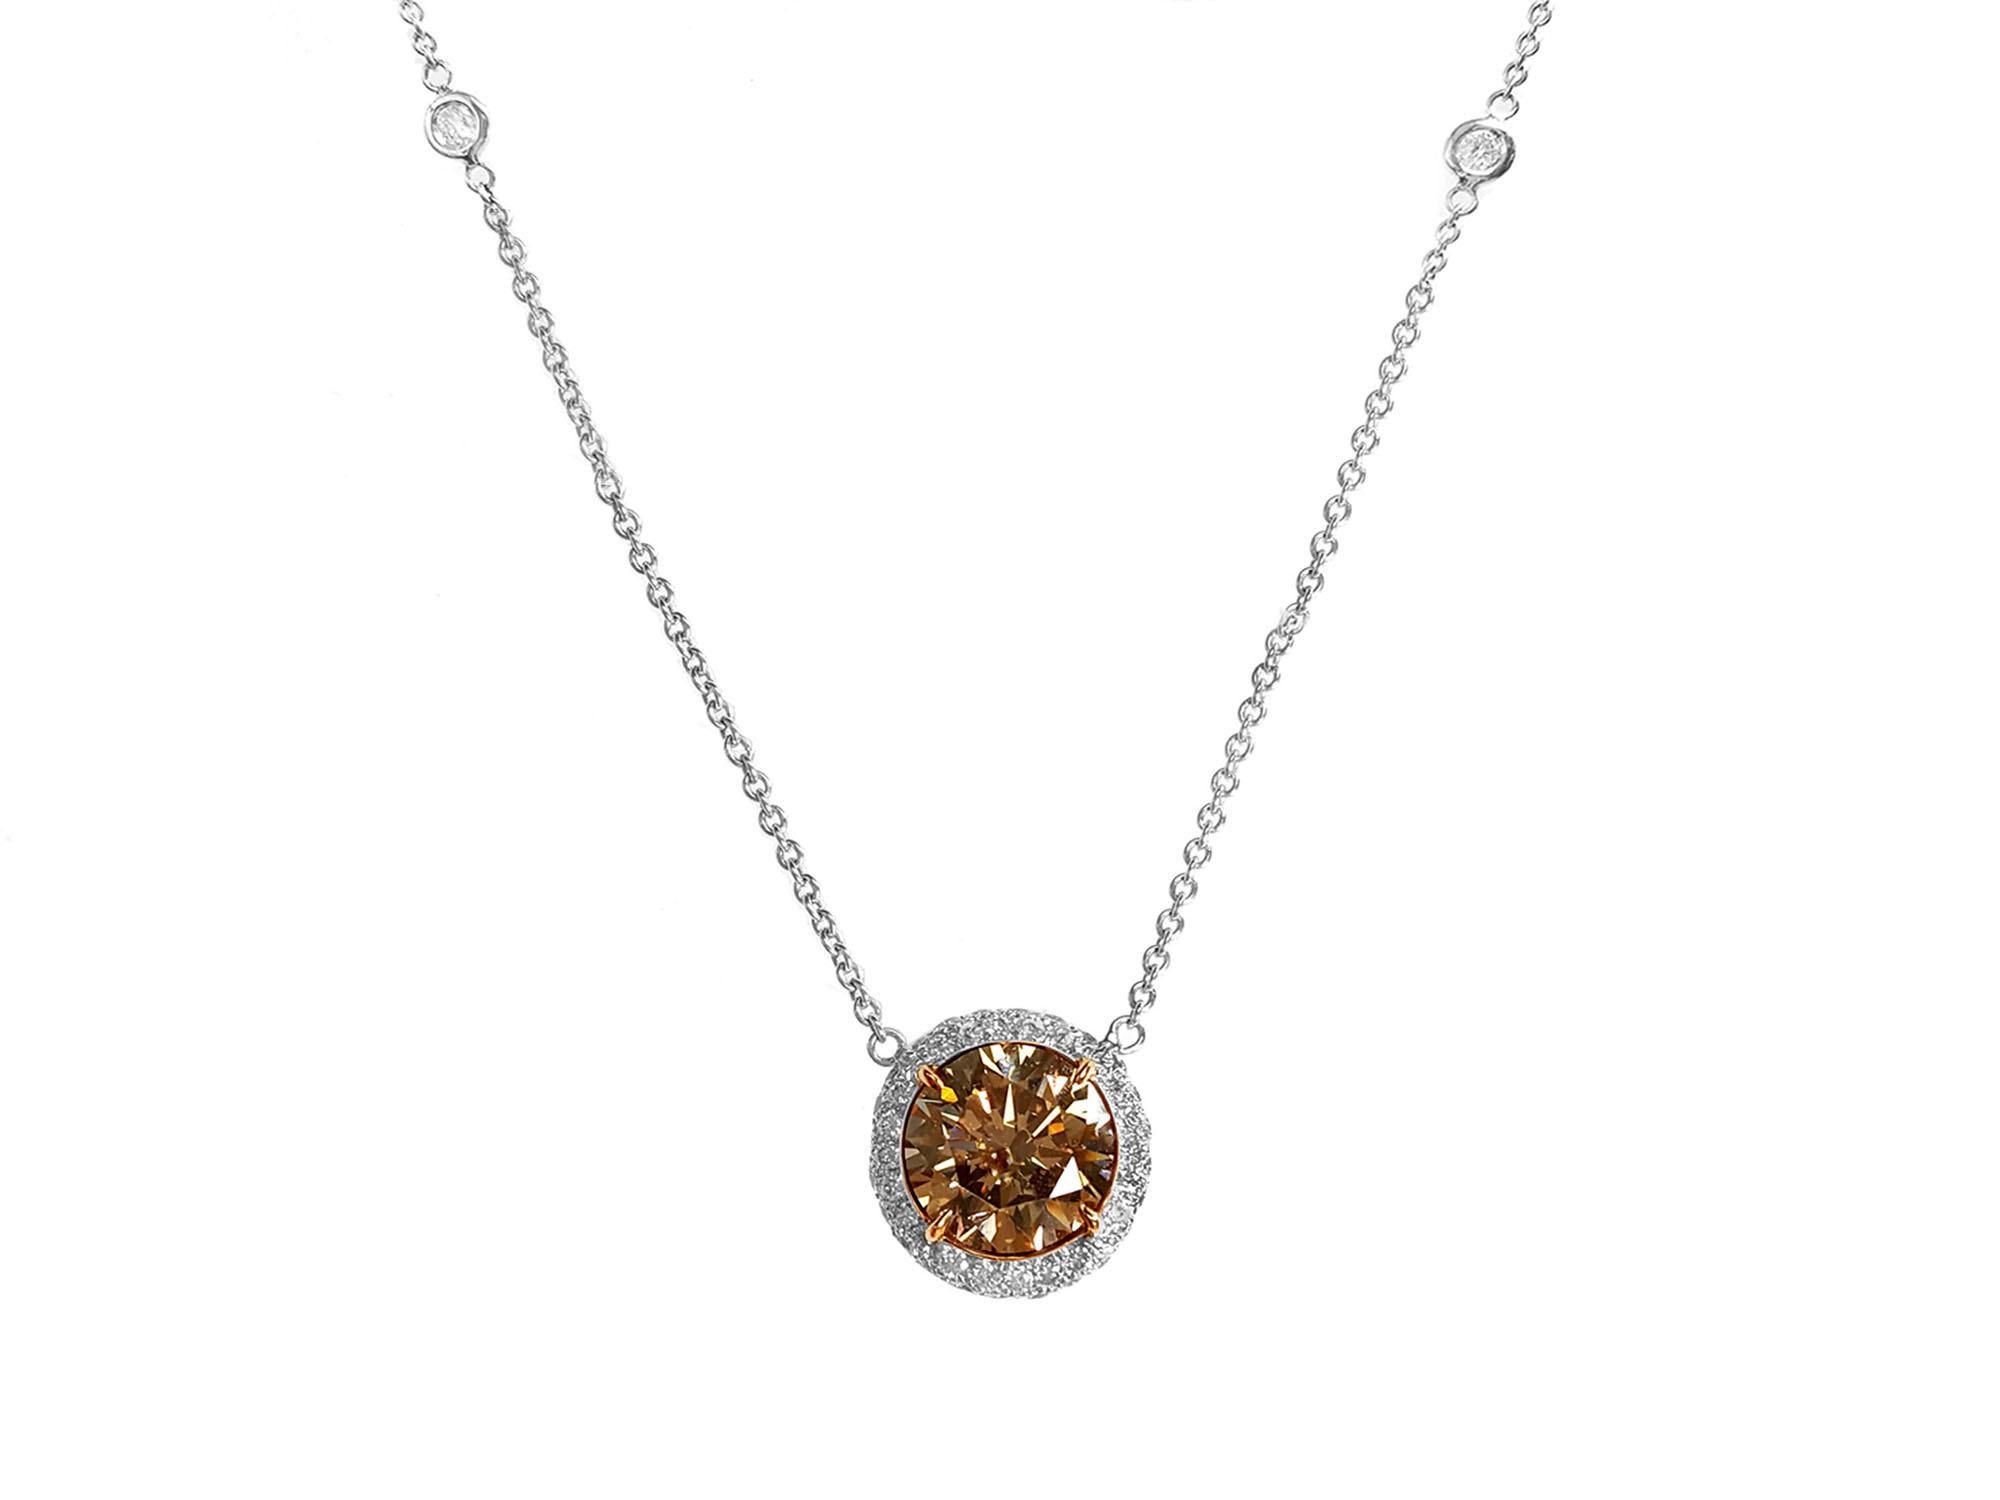 Featuring a stunning Halo Pendant Necklace style showcasing a 2.53 Carat Round Brilliant Brown Diamond in the center. The classic design brings out the beauty of the center stone with the surrounding 39 round cut diamonds, set in a polished 18k